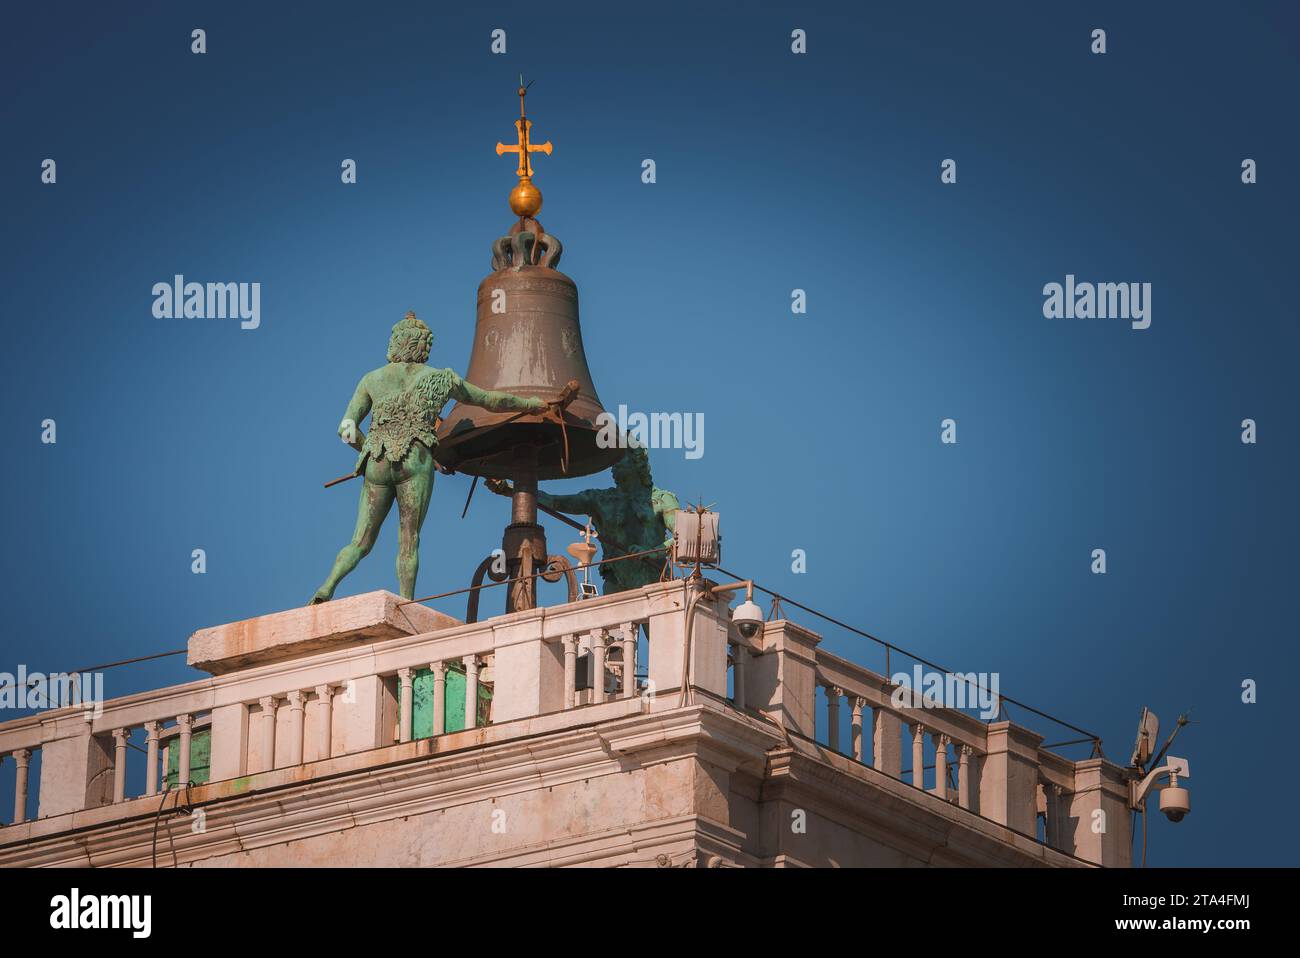 Rome Bell Tower with Cross: Symbolic Religious Architecture in Urban Landscape Stock Photo